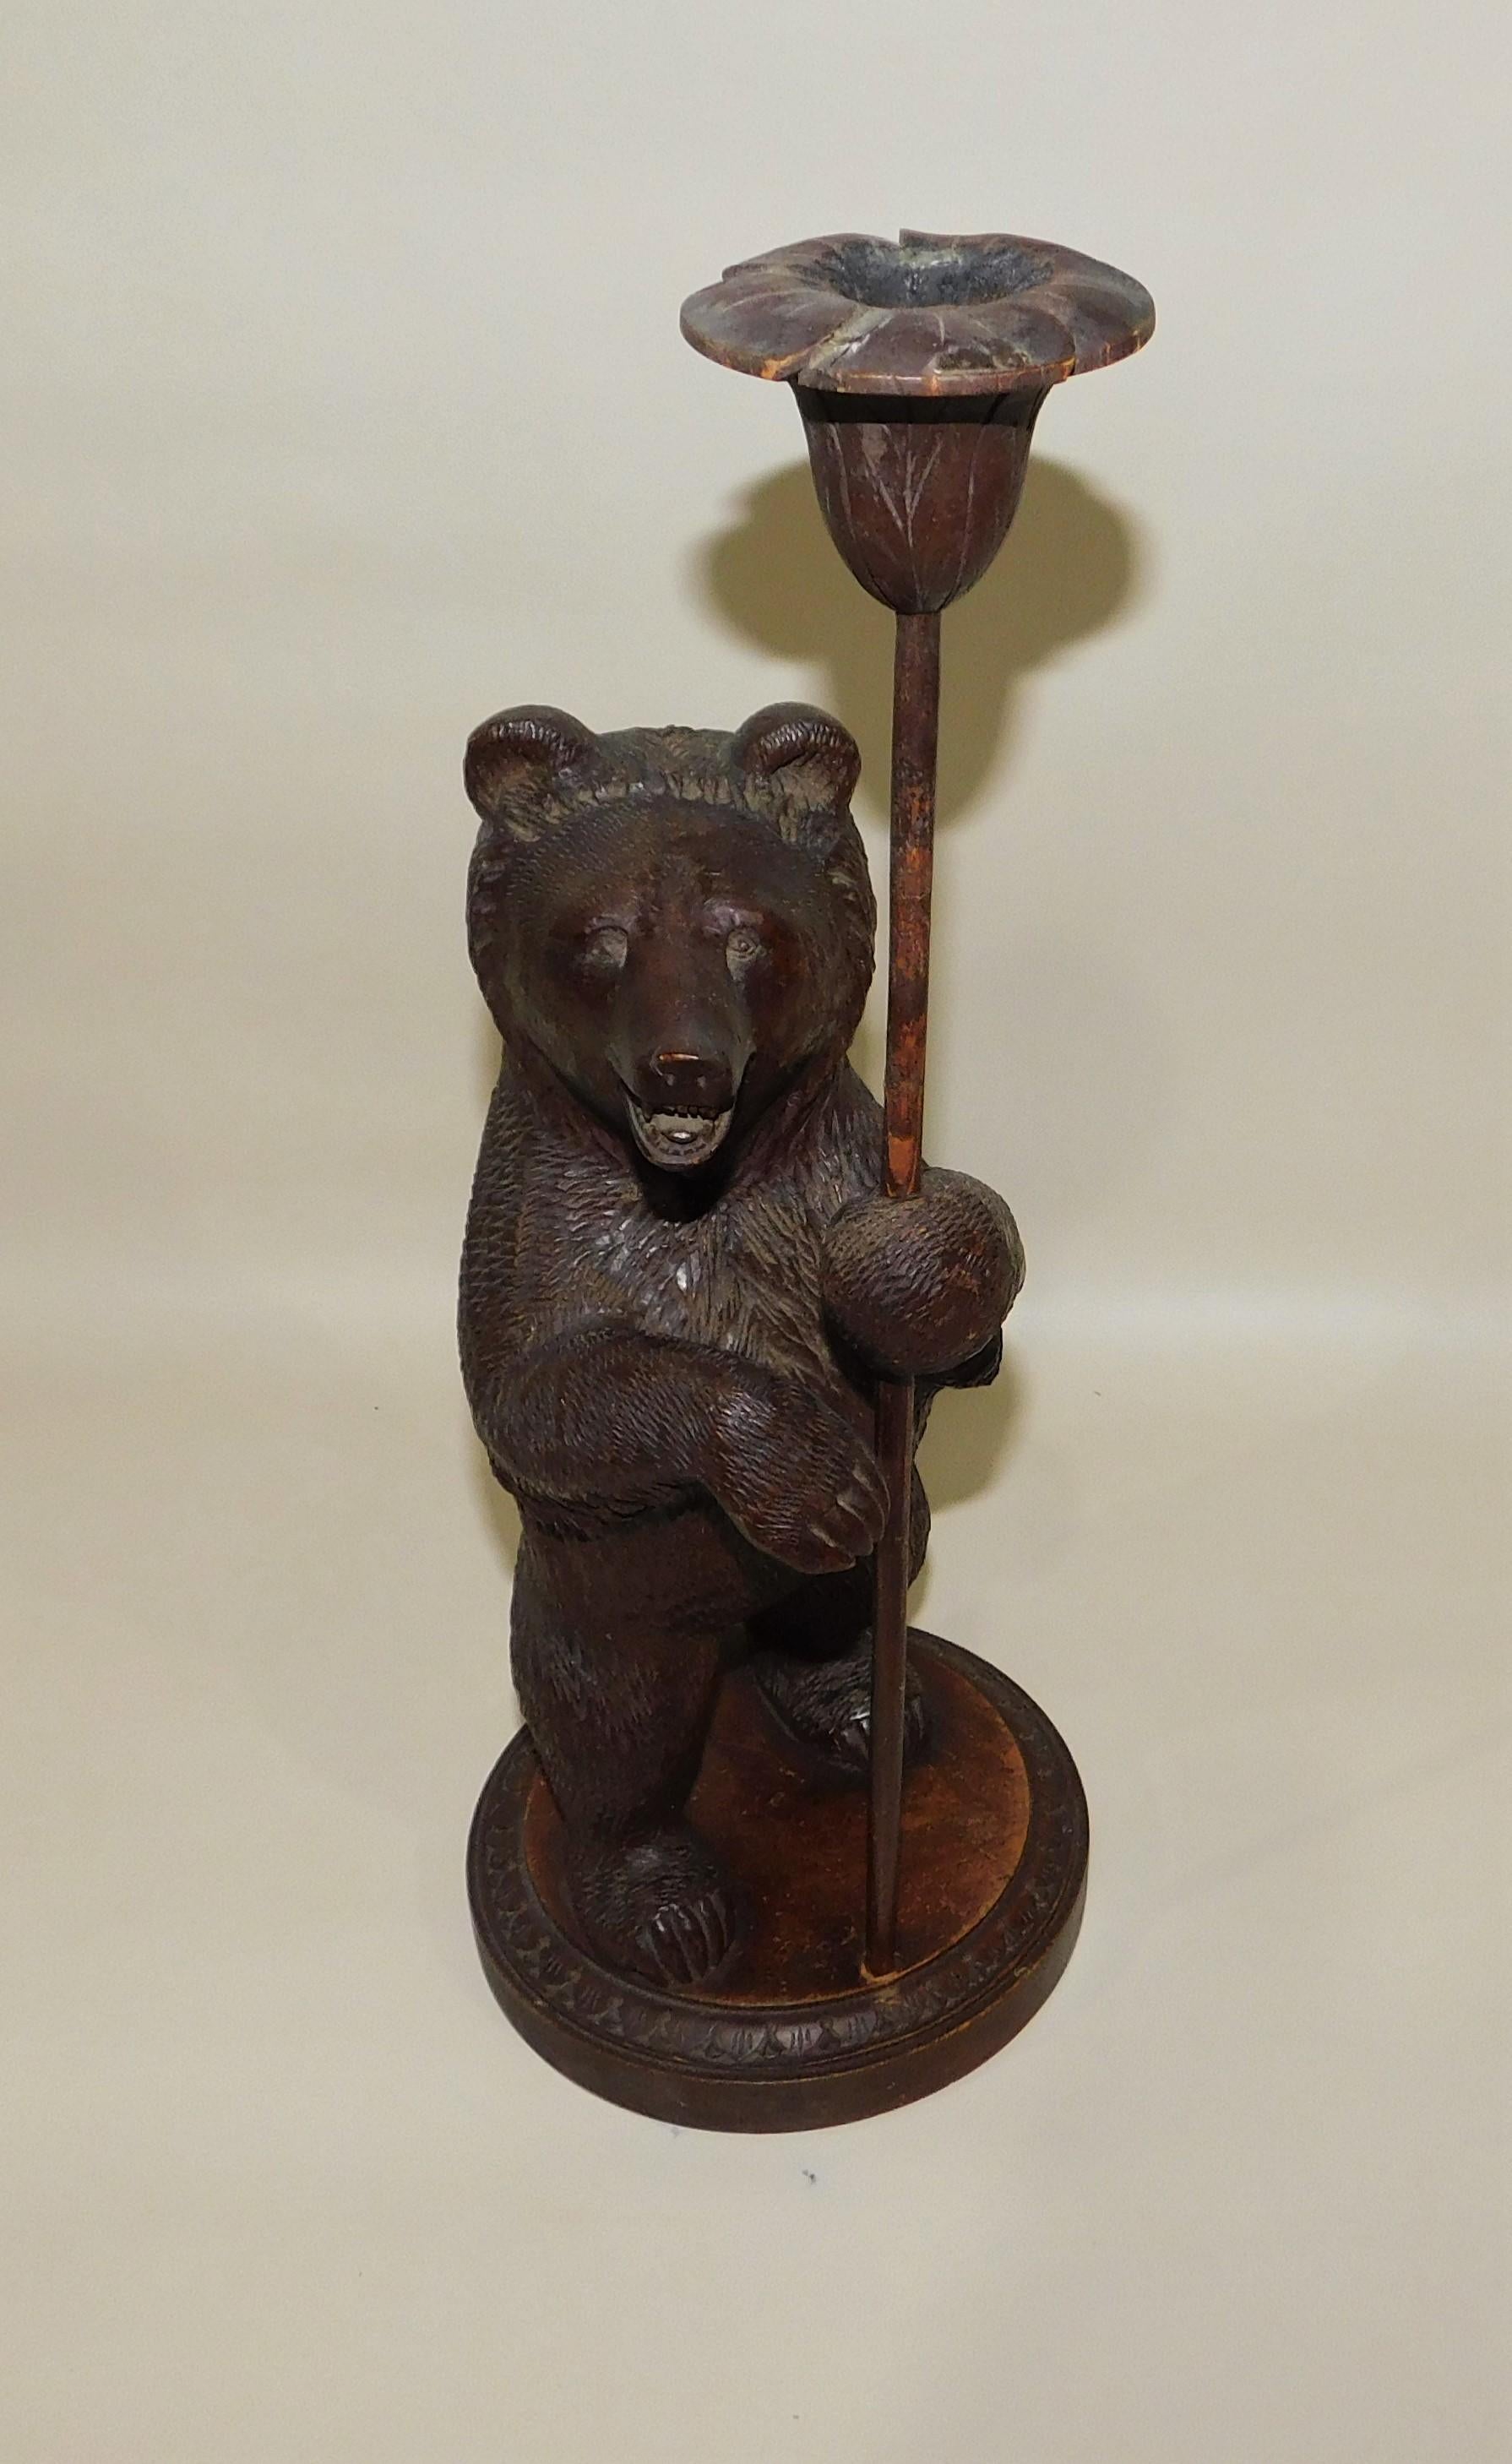 Swiss Brienz Black Forest Hand-Carved Wood Candle Holder In Good Condition For Sale In Hamilton, Ontario